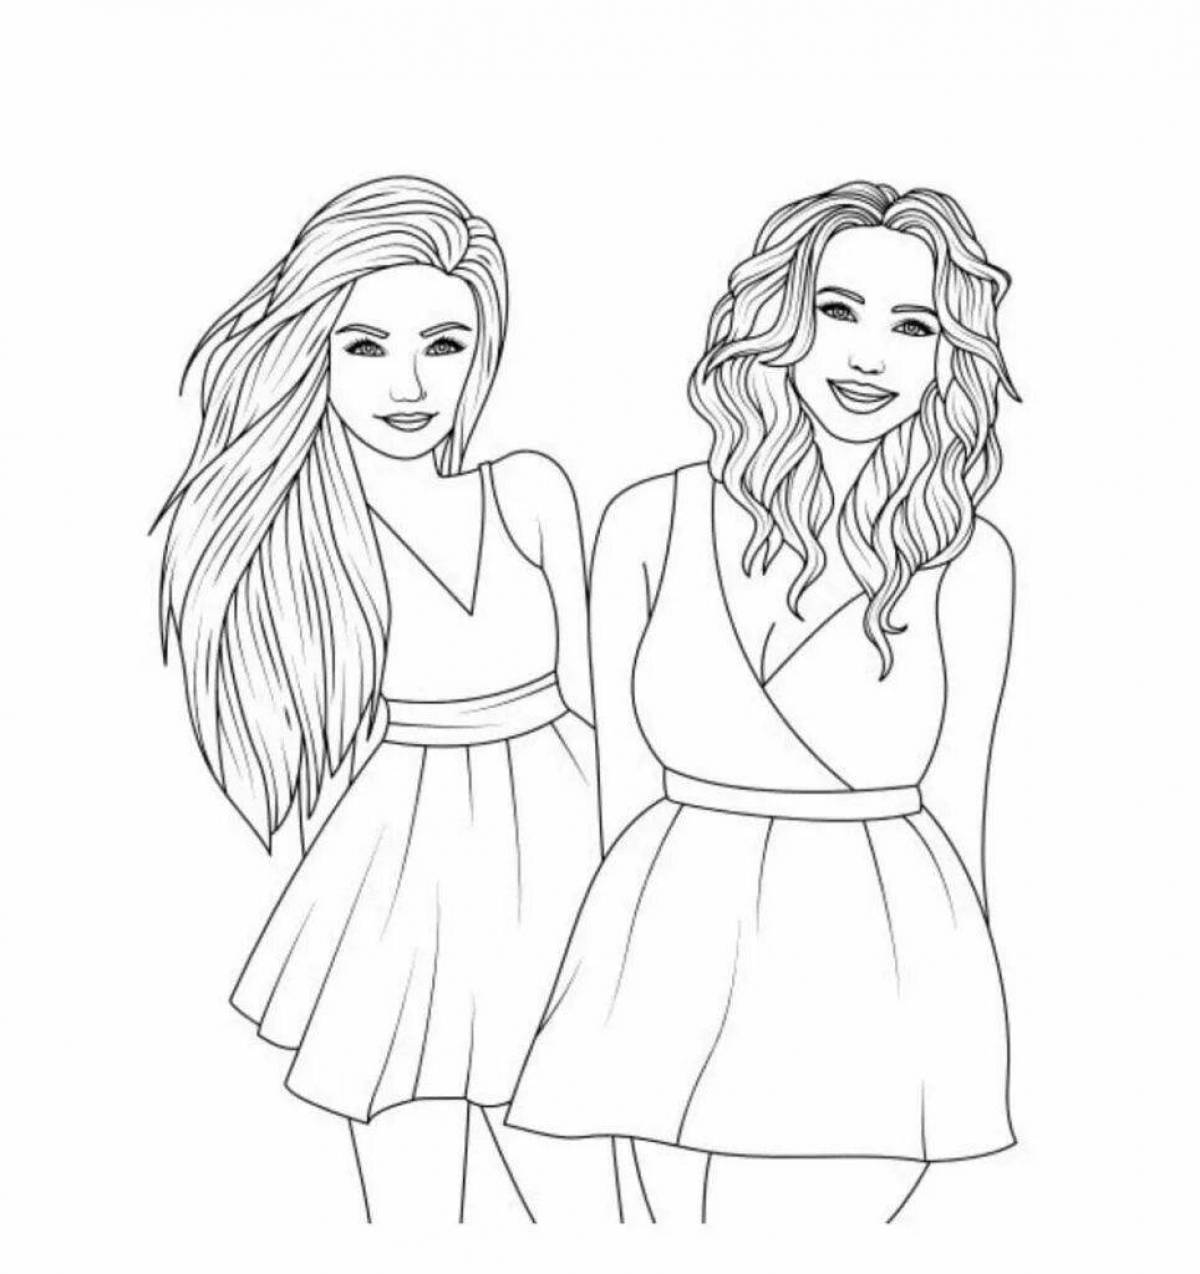 Lp girls colorful coloring page